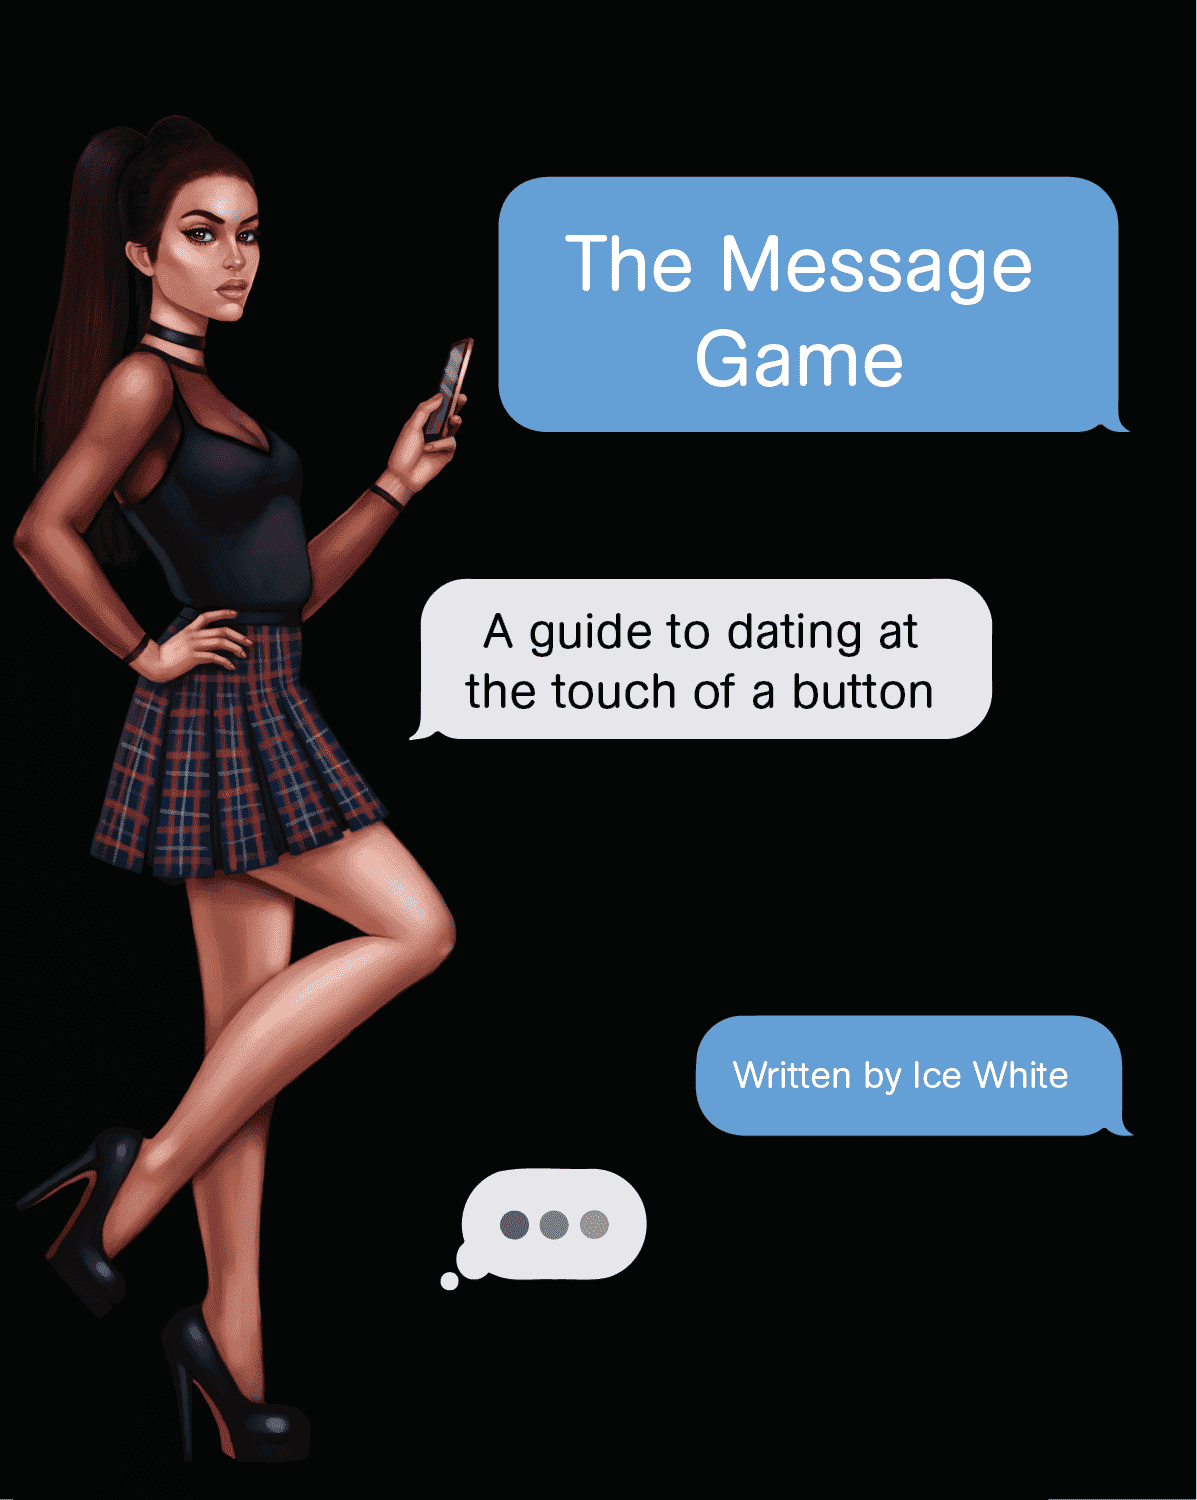 The Message Game, Ice White. The Game, Neil Strauss, Mystery Method, Erik Von Markovik Mystery, Models Mark Manson, Book, Ebook, Game Global, RSD PUA Books